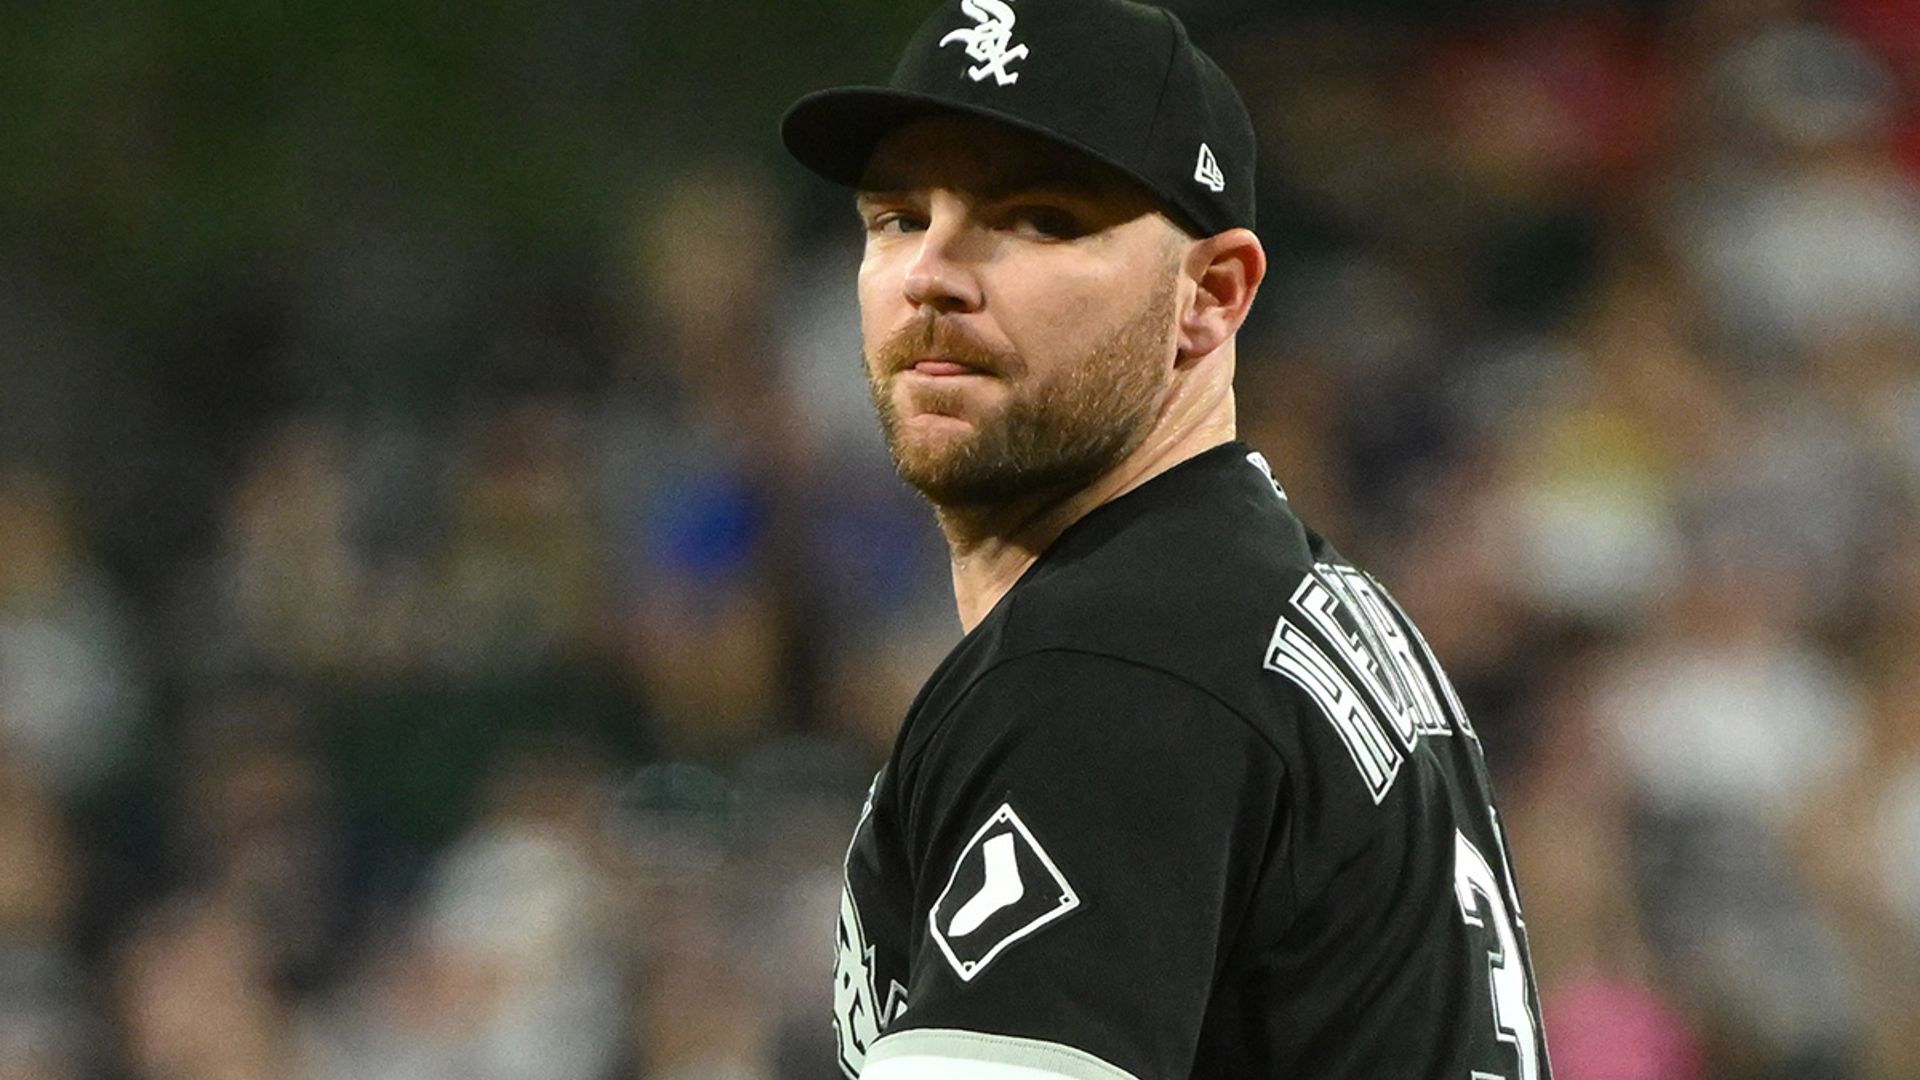 Chicago White Sox pitcher Liam Hendriks begins treatment after